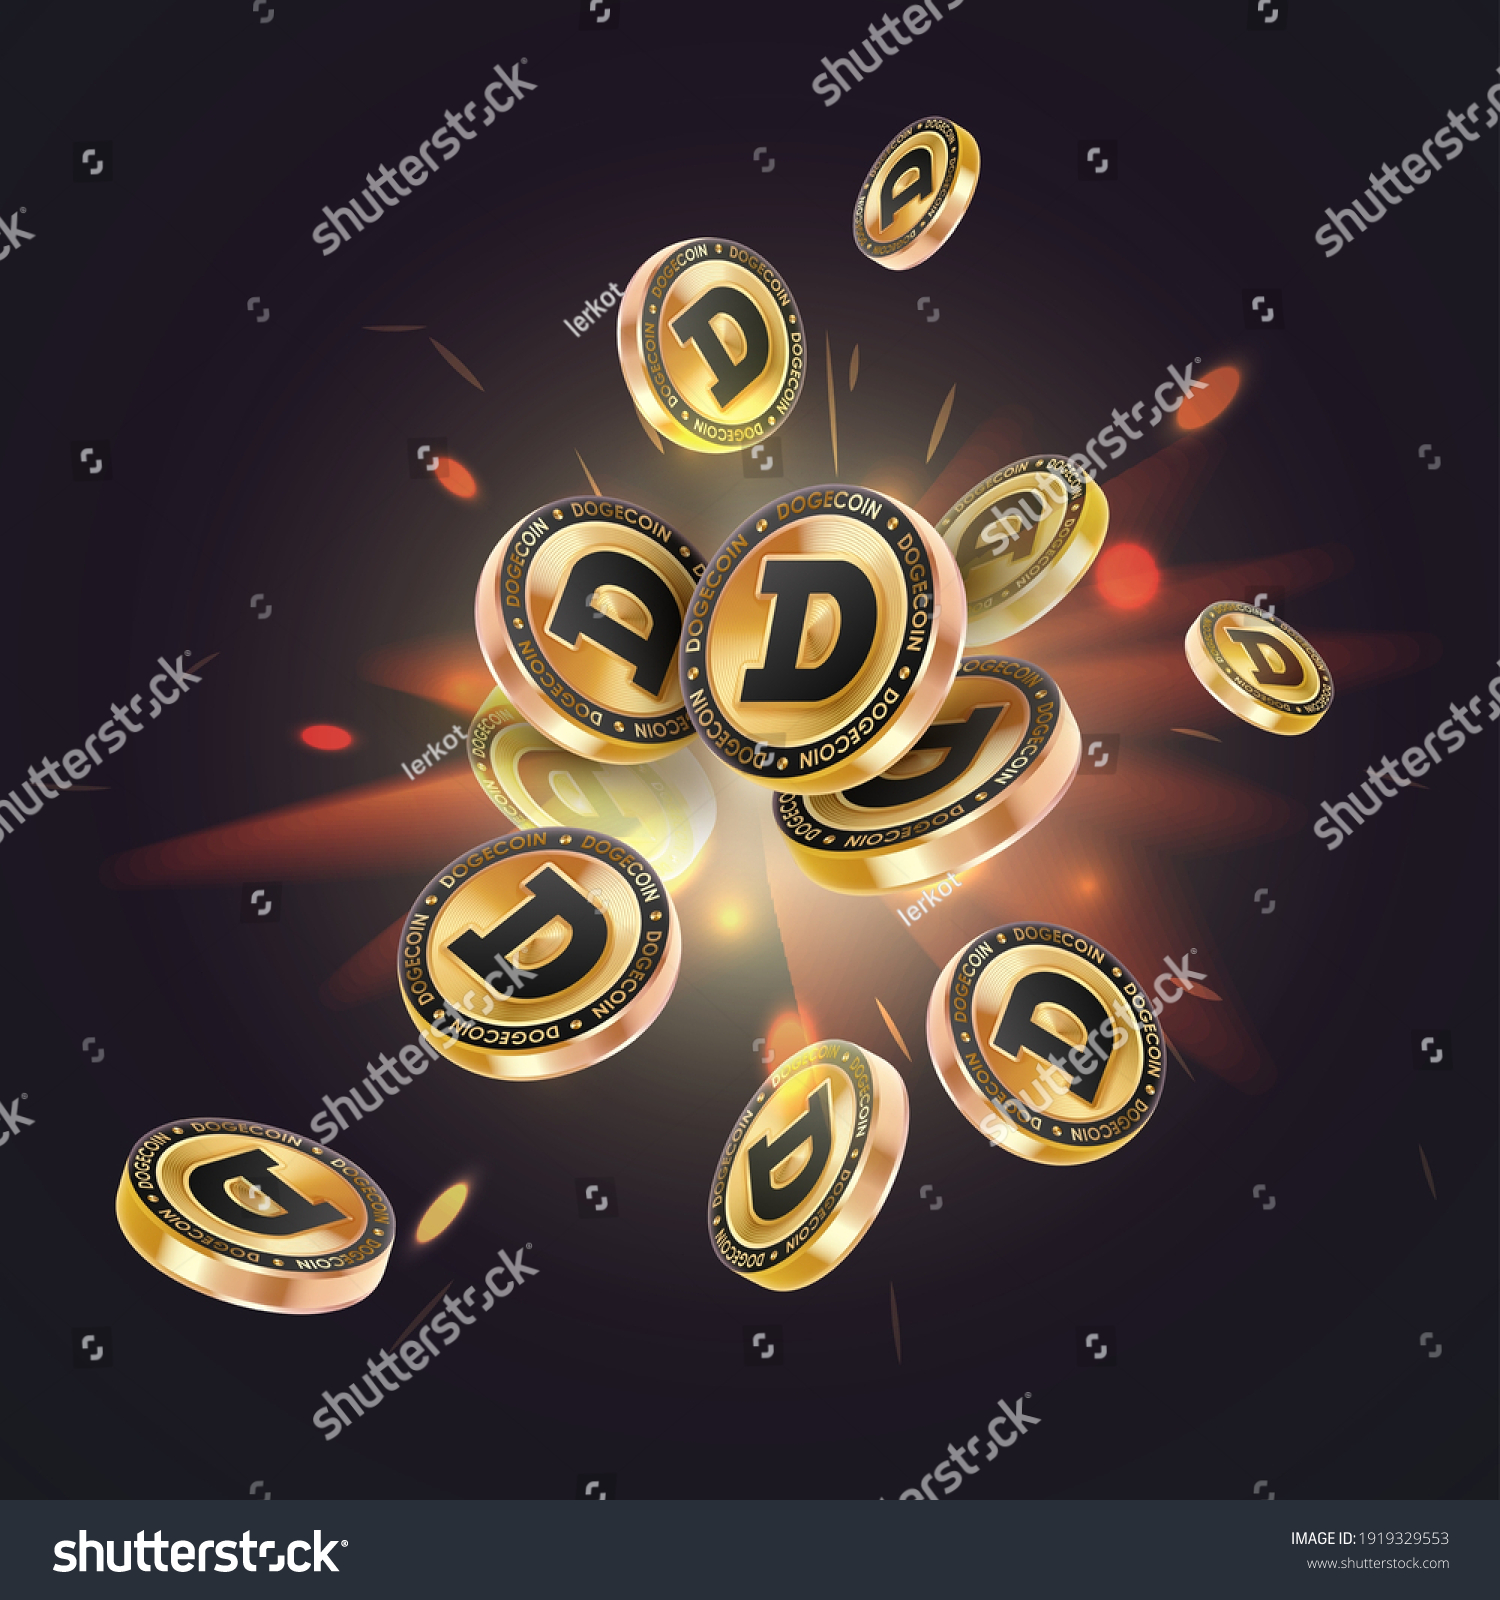 SVG of Explosion of flying gold coins, golden with black coins, dogecoin, crypto currency on black background. Vector illustration for card, design, flyer, poster, decor, banner, web, advertising. svg